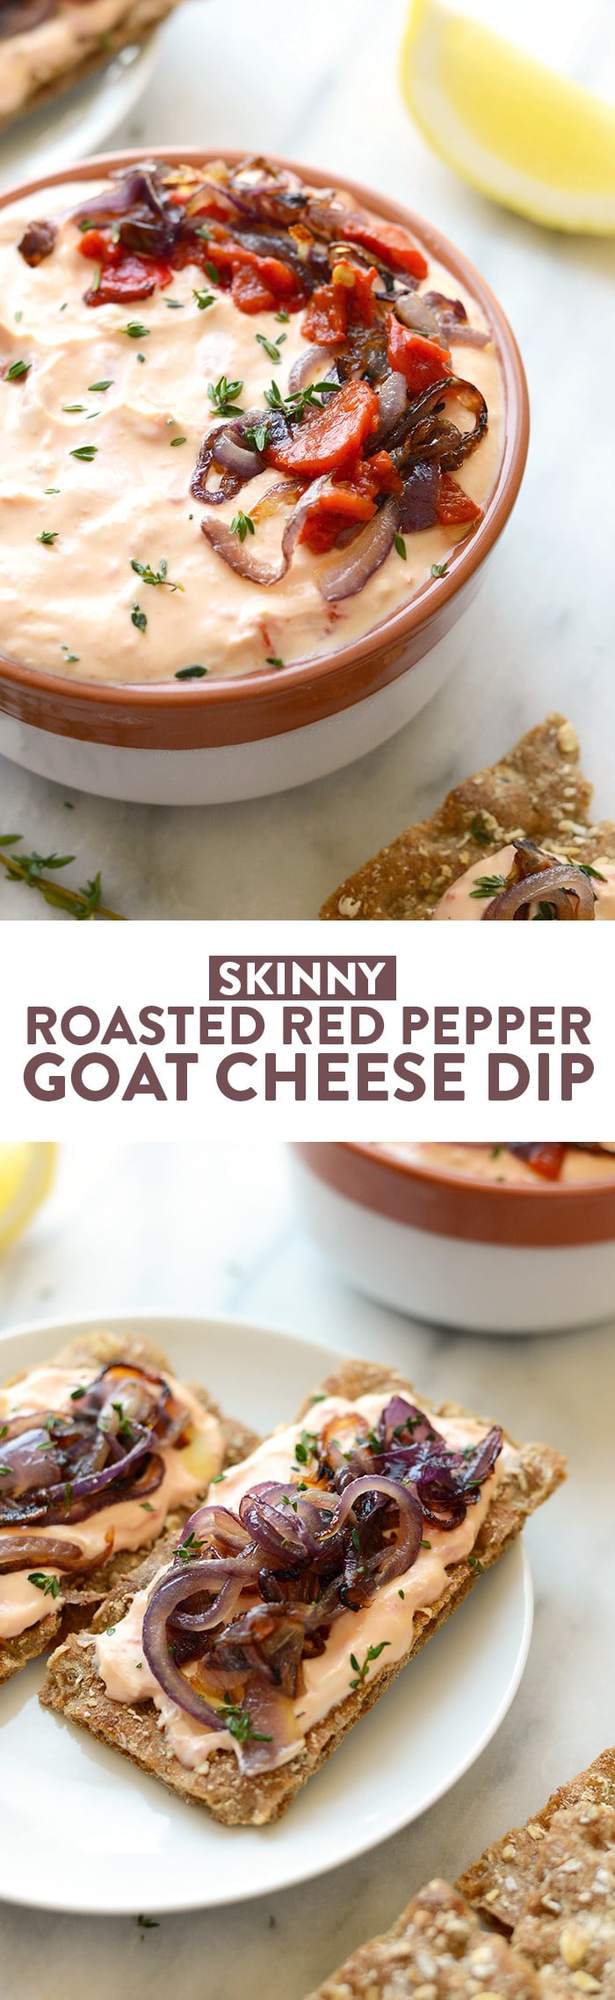 With Sunday football back in action, this Skinny Roasted Red Pepper and Goat Cheese Dip makes for the most perfect appetizer. It's made with a non-fat Greek yogurt base, pureed roasted red peppers, and goat cheese! 